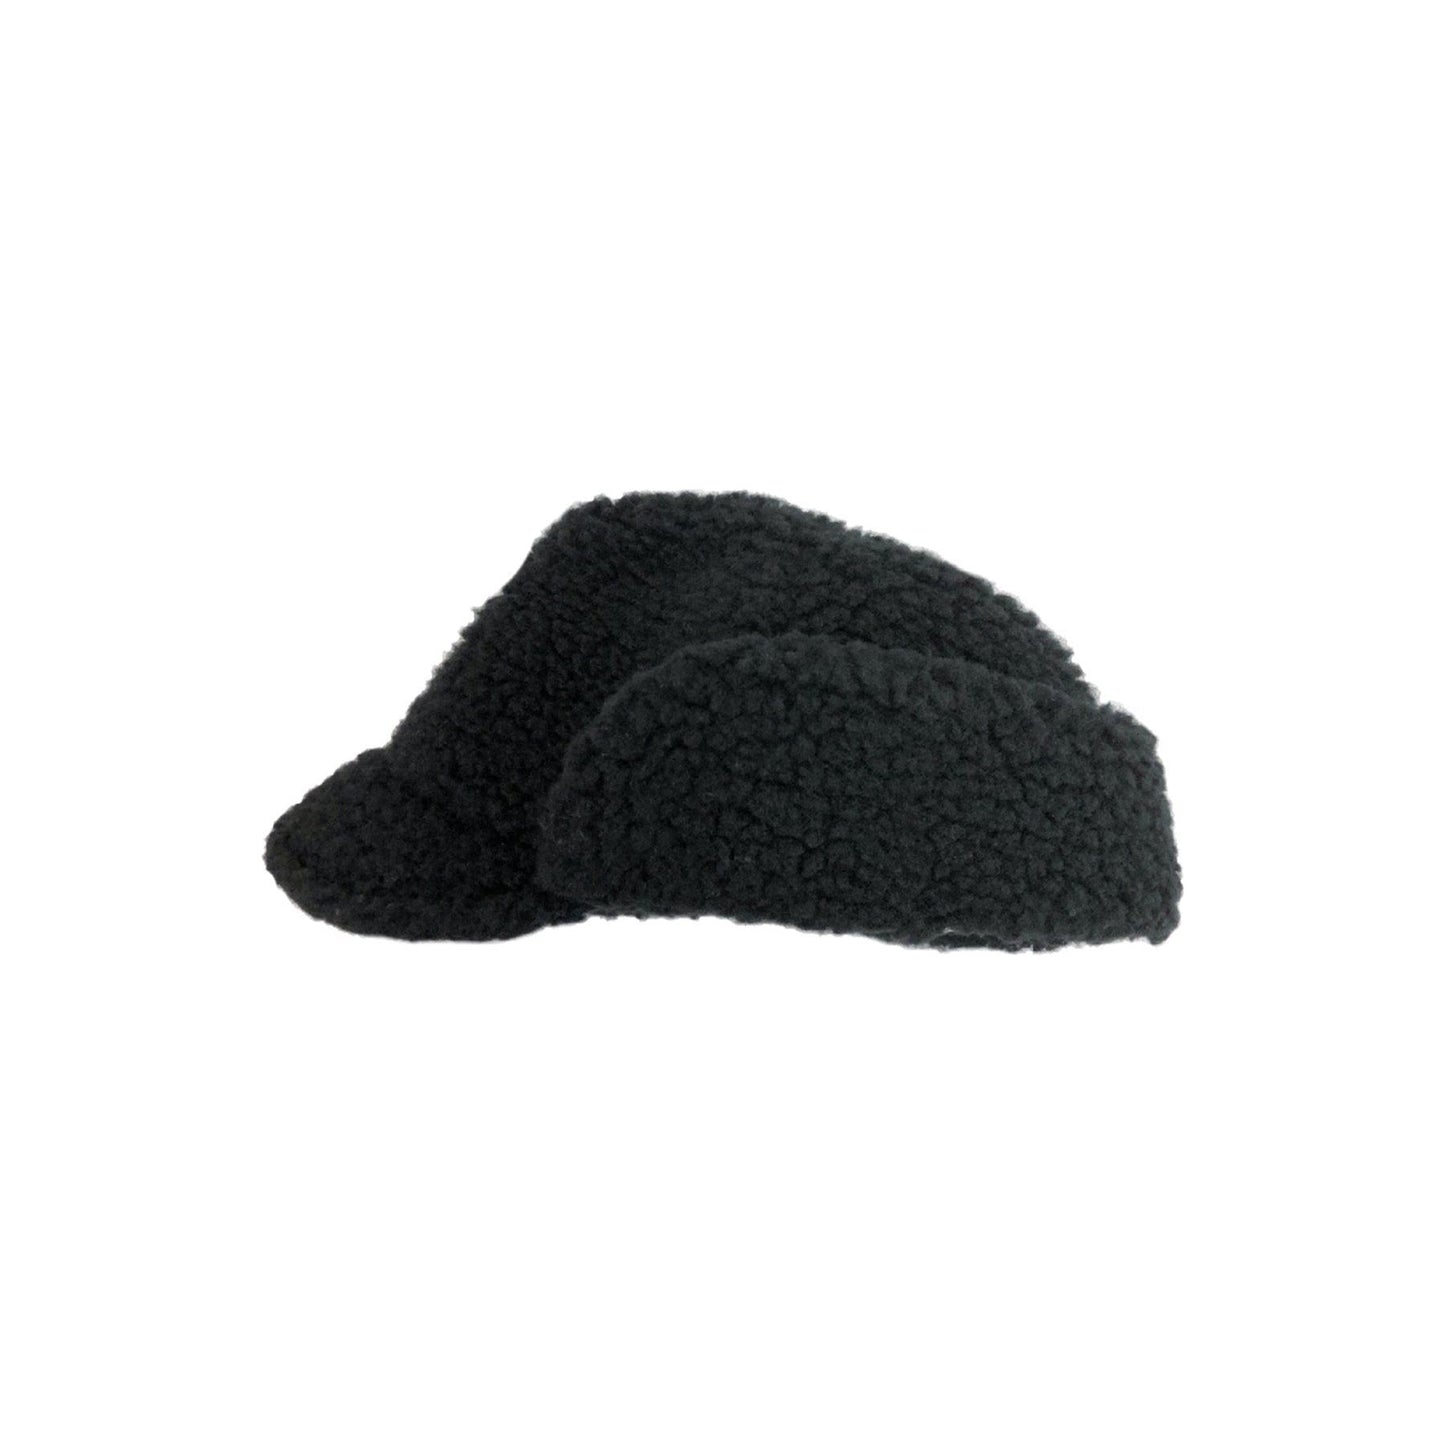 Cableami Winter Hat Boa Sherpa Cap With Earflap, Black